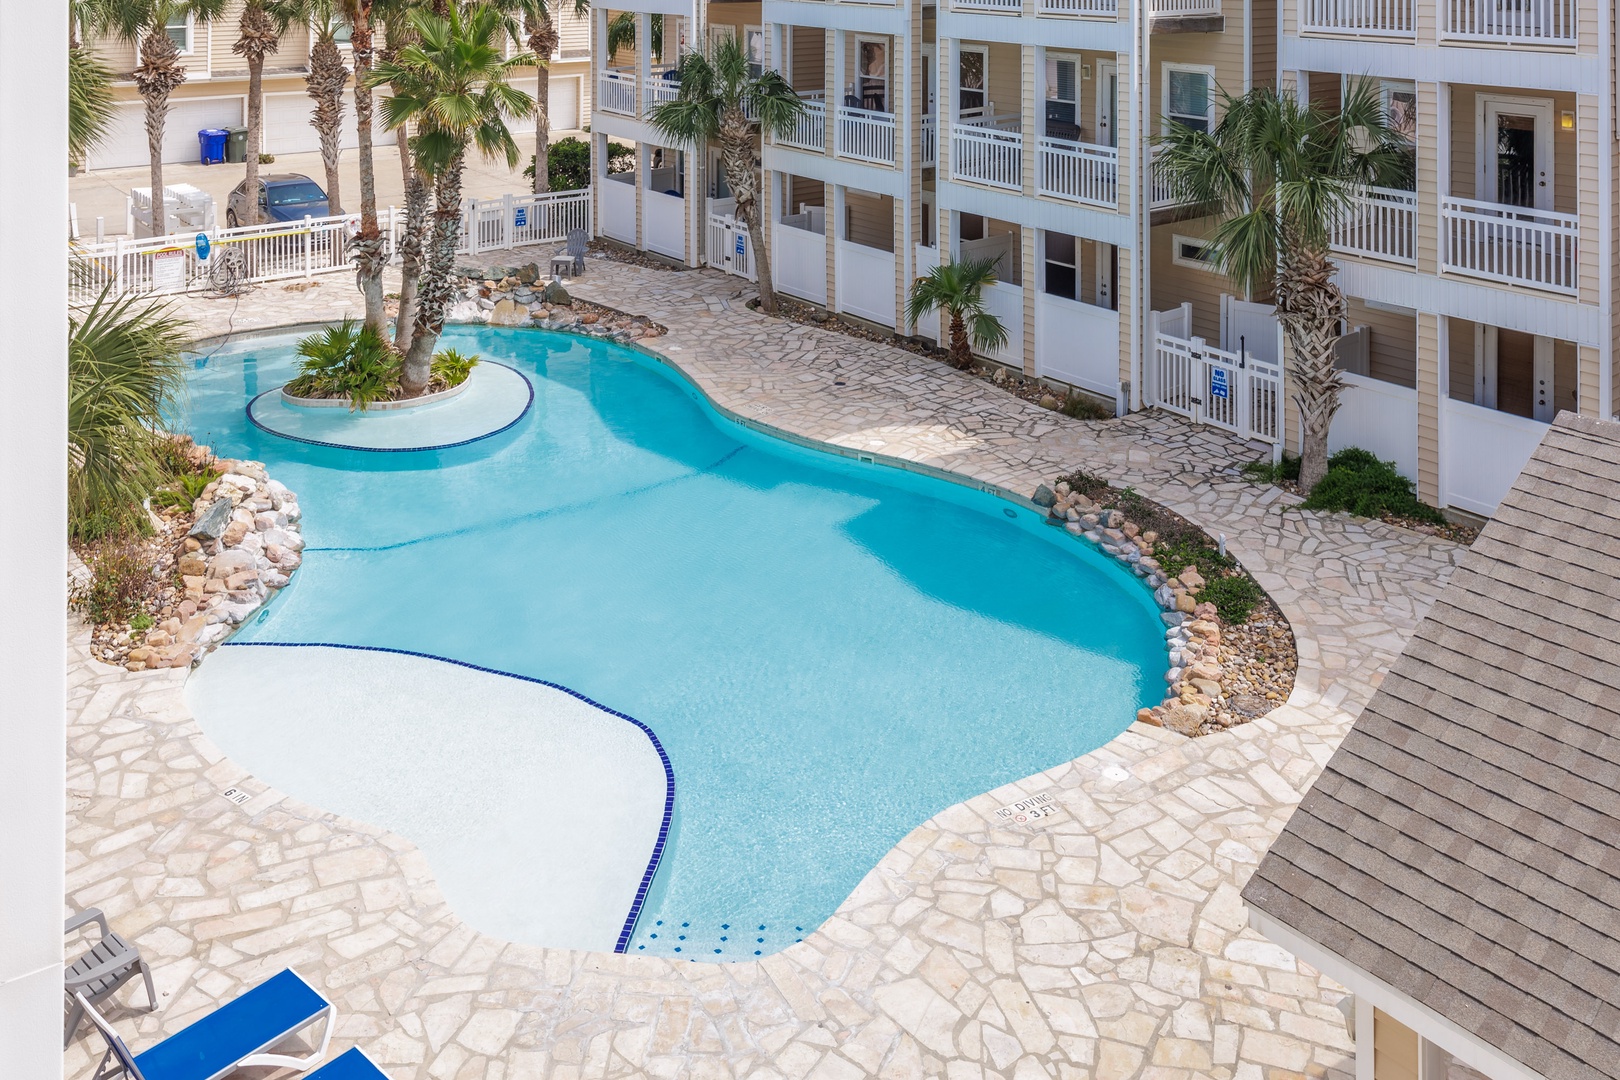 Dive into luxury and soak up the sunshine at the complex pool